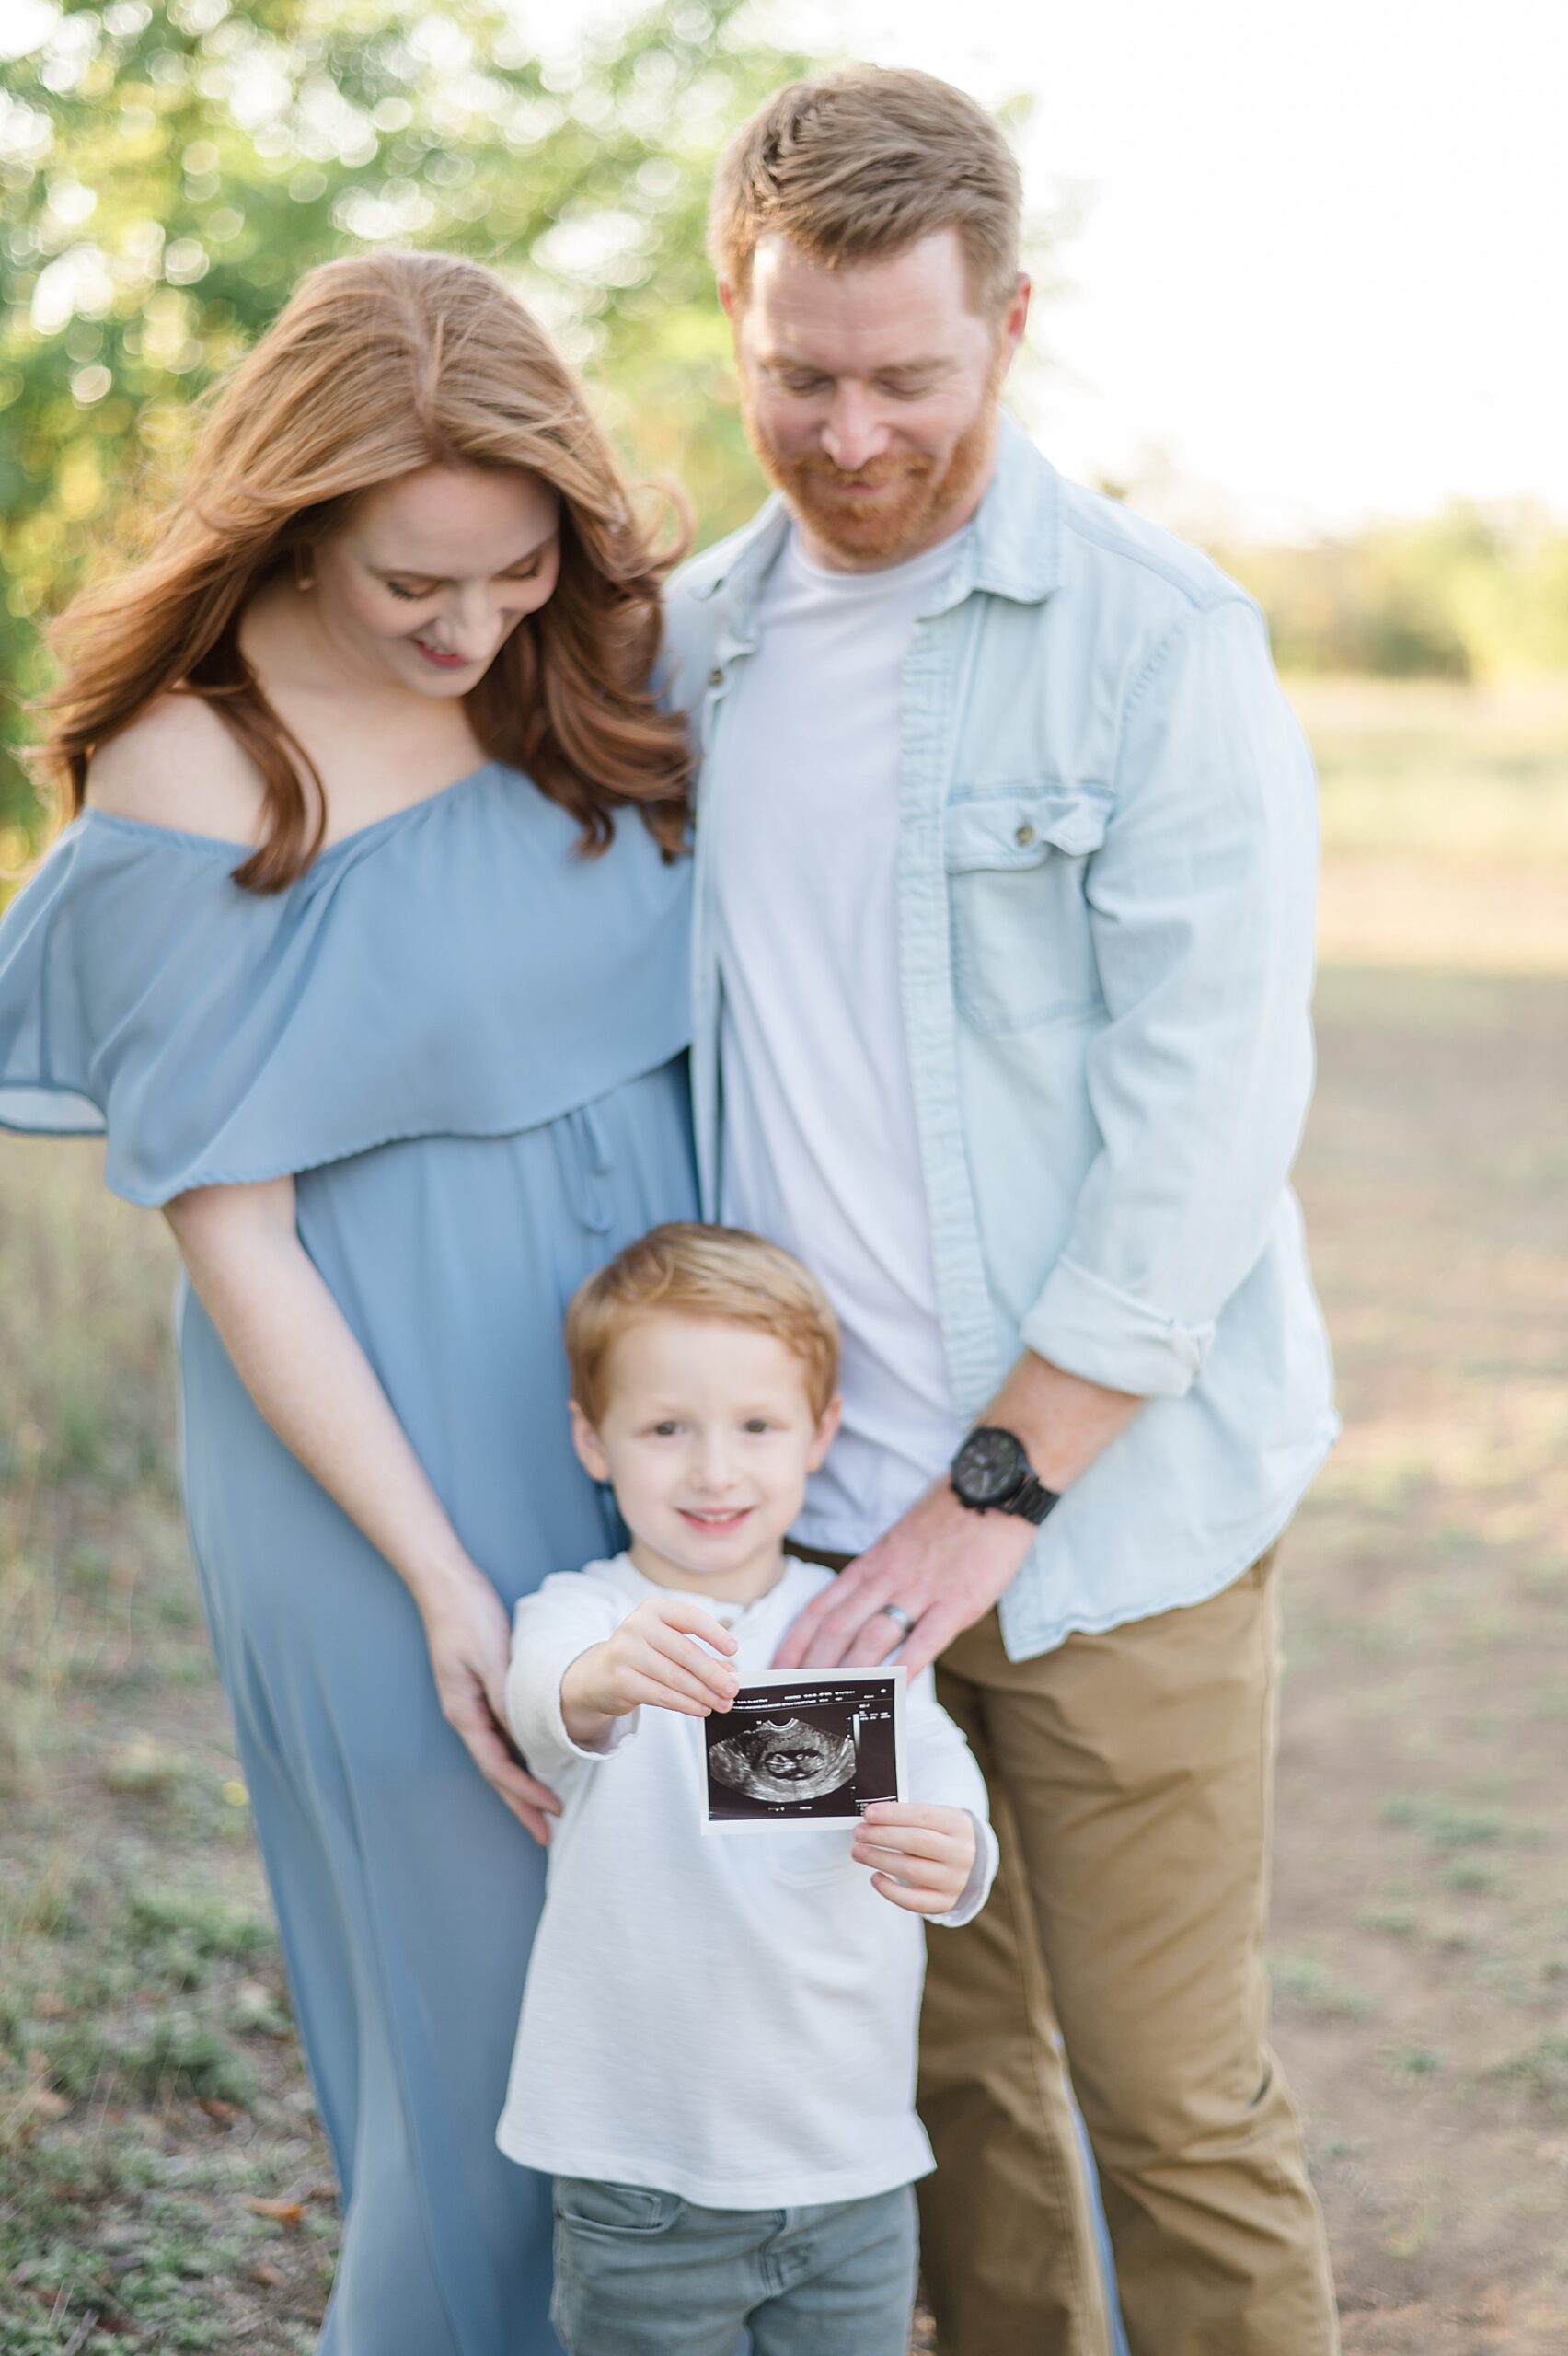 5 things to bring to your pregnancy announcement photoshoot by Lindsey Dutton Photography, a Dallas maternity photographer
